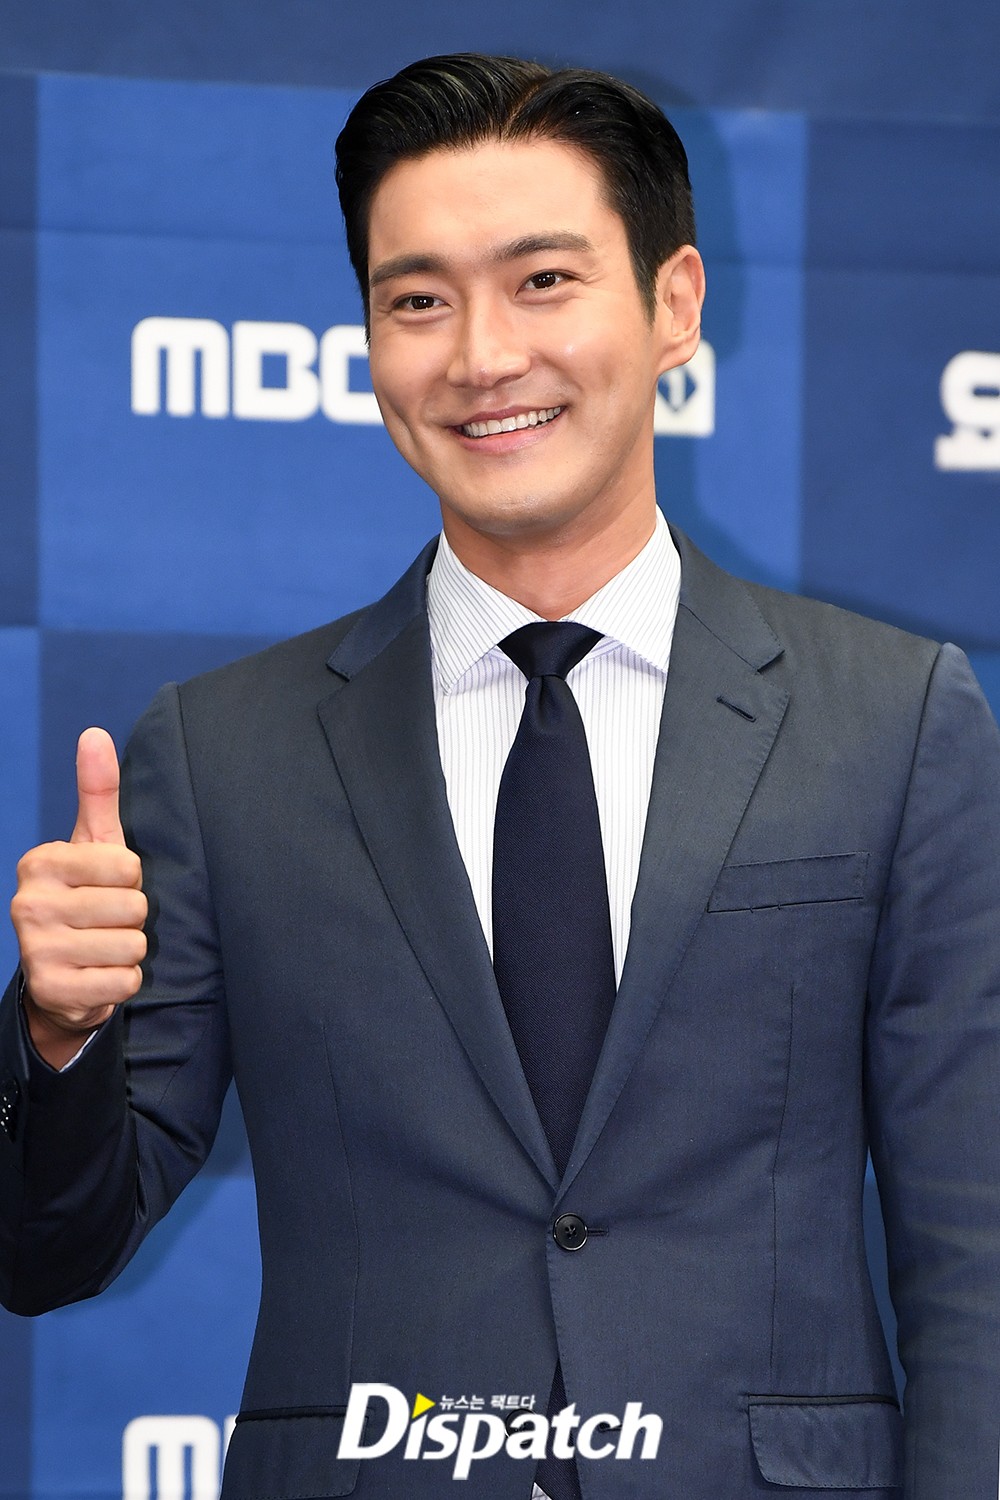 MBC Everlon Entertainment yacht Expedition production presentation was held at the Seoul Hotel in Sangam-dong, Seoul, on the afternoon of the 12th.Choi Siwon completed the dandy fashion in a suit on the day, with a gentle smile and photo time with reporters.Meanwhile, yacht expedition is a documentary entertainment program that shows the process of four men who dreamed of adventure challenging the Pacific voyage on yacht.The first broadcast on the 17th.youngest crew membera cheerful smilevisuals received by SeaMeet me on TV.